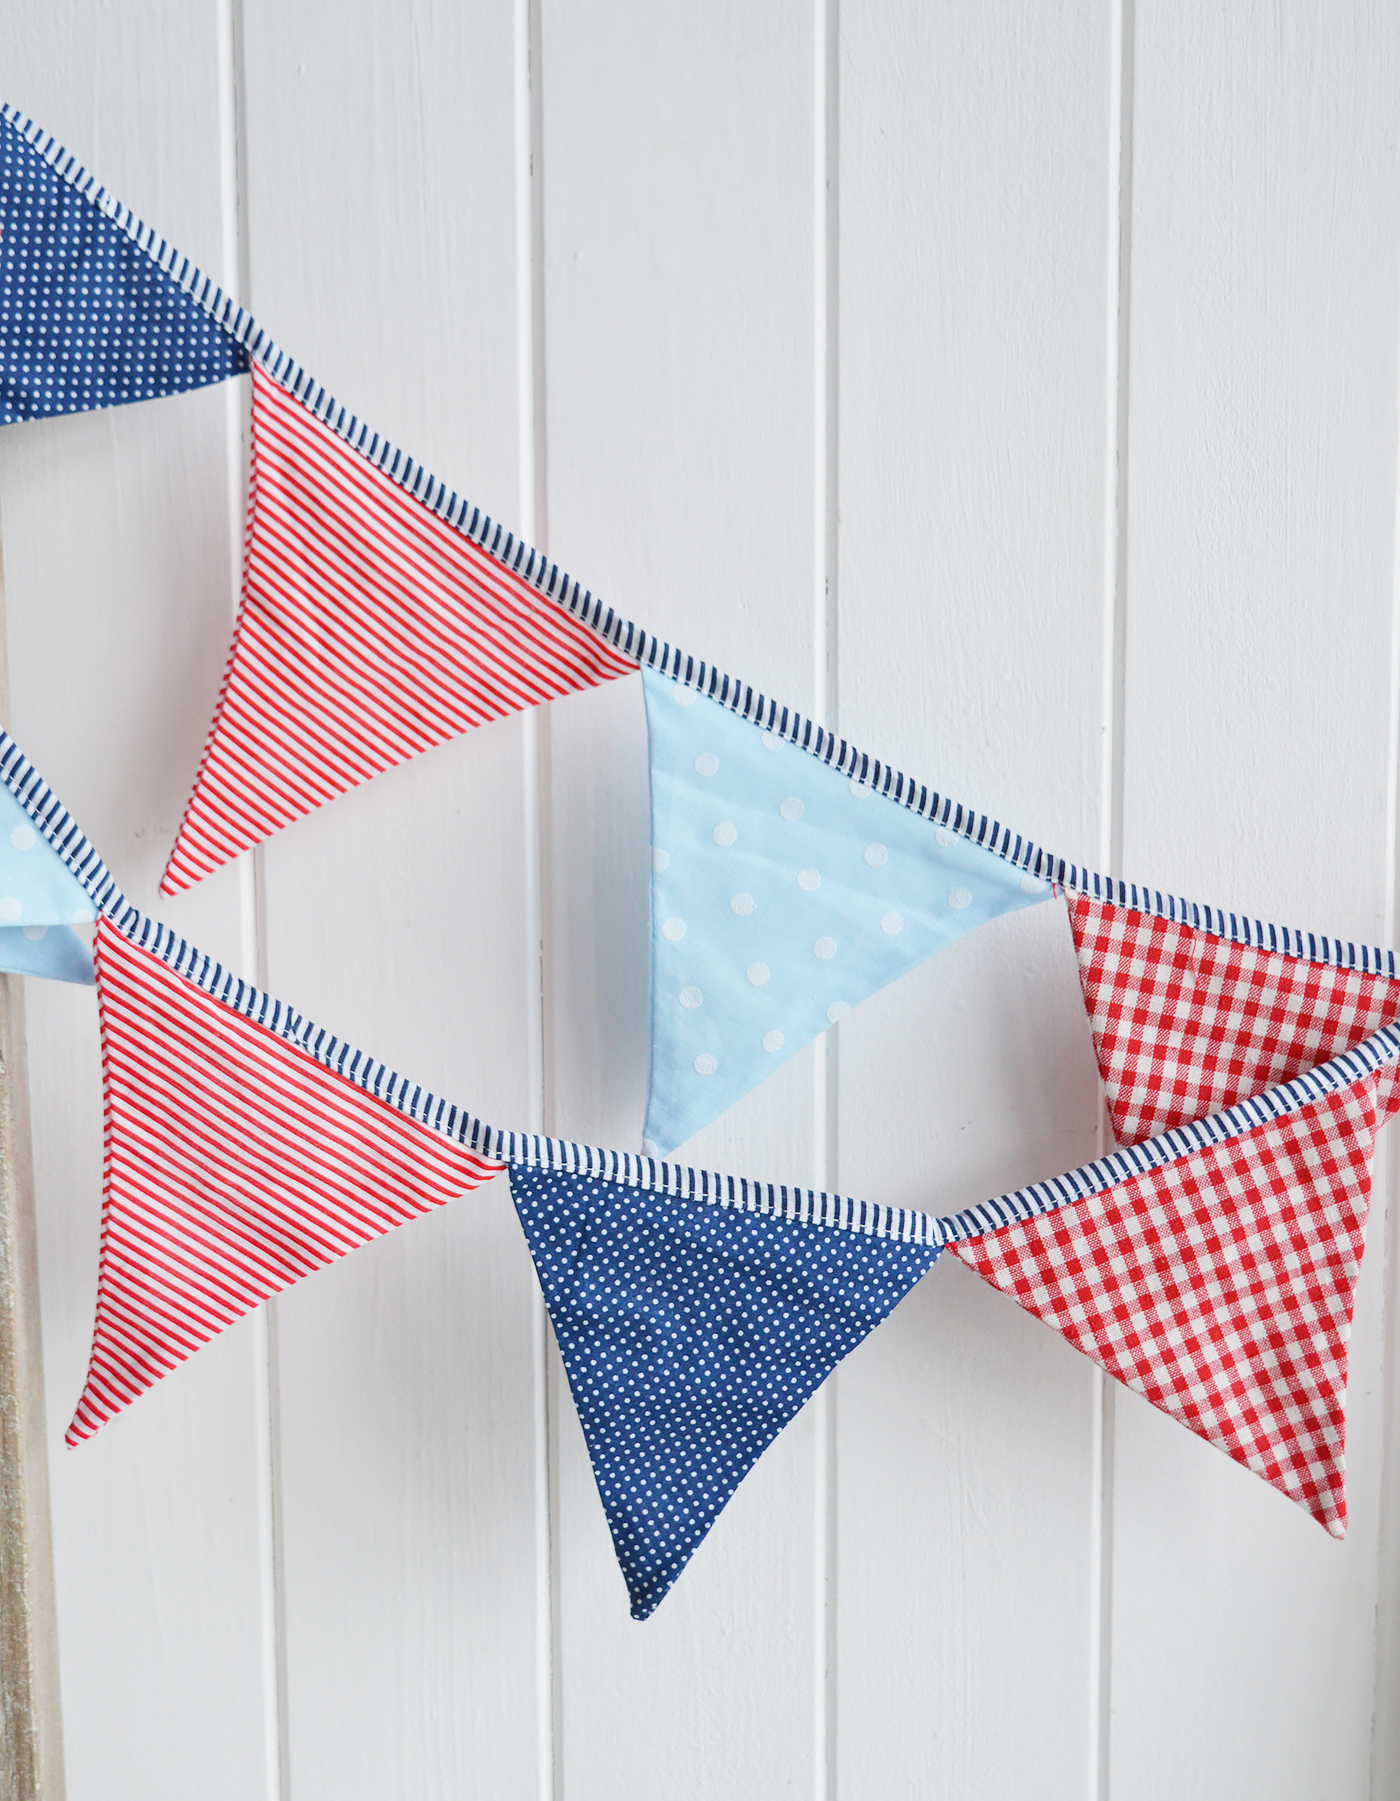 Red White and Blue Bunting Stripes, Spots and Gingham  - White furniture and home decor from The White Lighthouse coastal, New England and country furniture and home decor accessories UK.